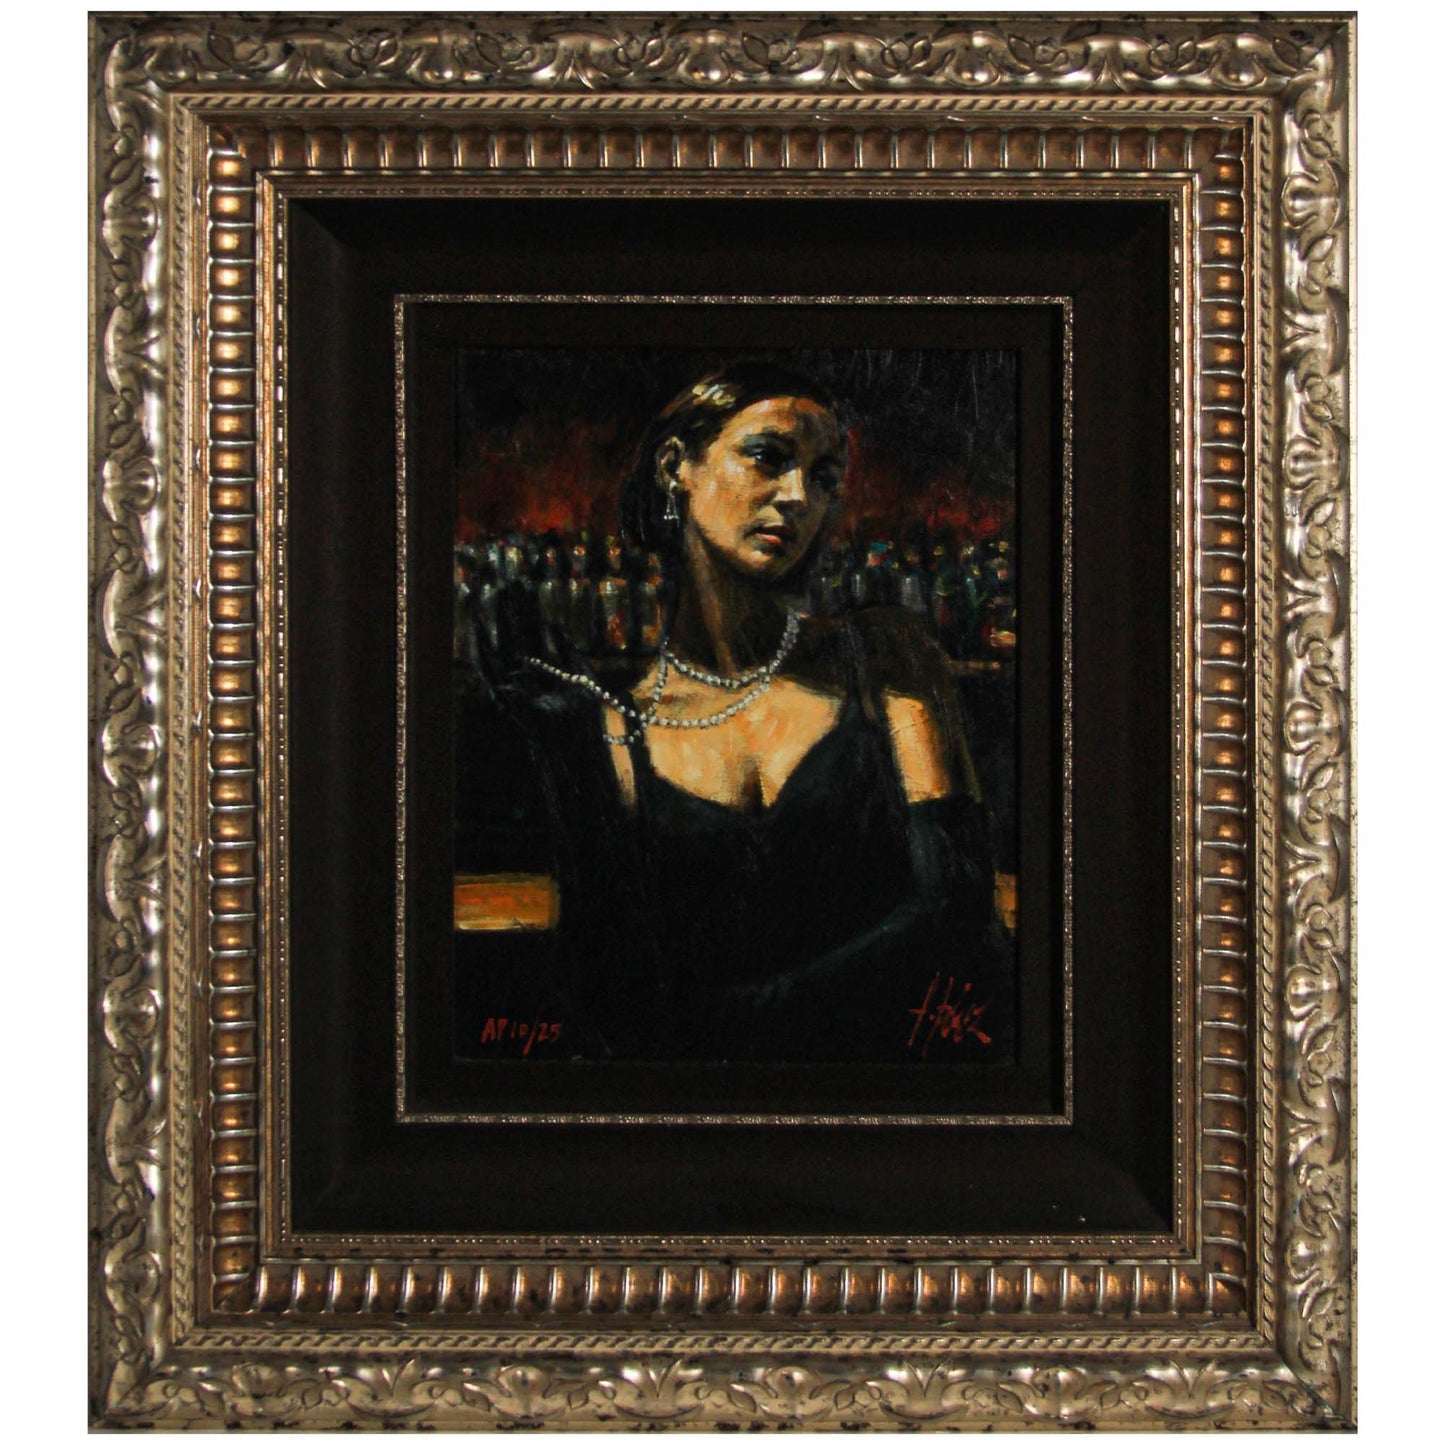 Fabian Perez; "Gloves and Pearls" Frame